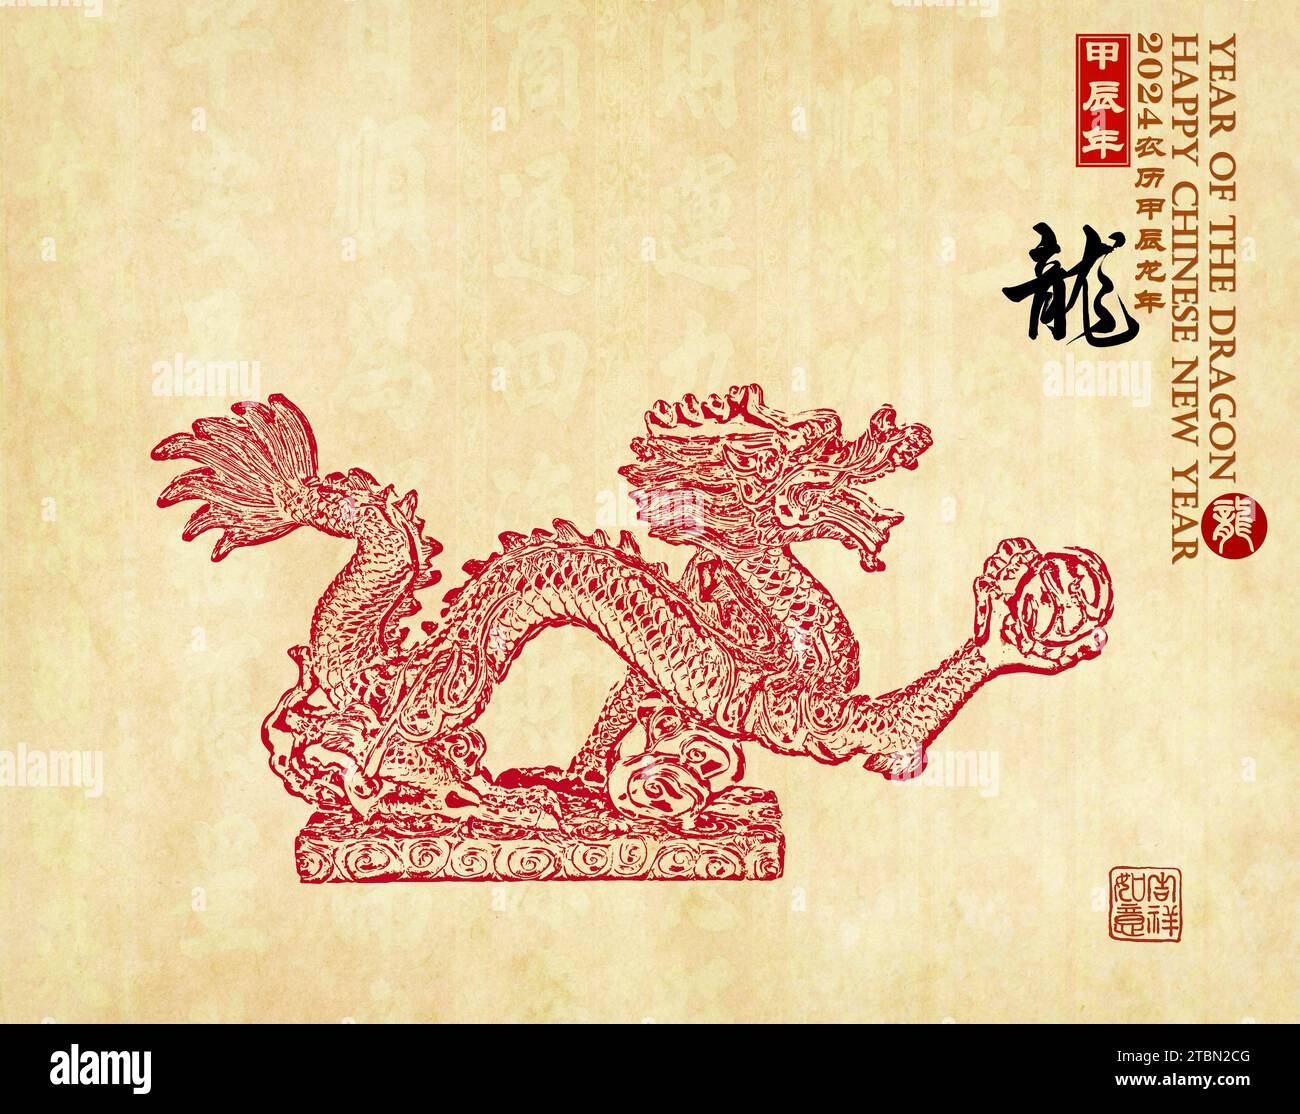 2024 is year of the dragon,Chinese zodiac symbol,Chinese characters translation: 'dragon'.rightside word and seal mean:Chinese calendar for the year,d Stock Photo